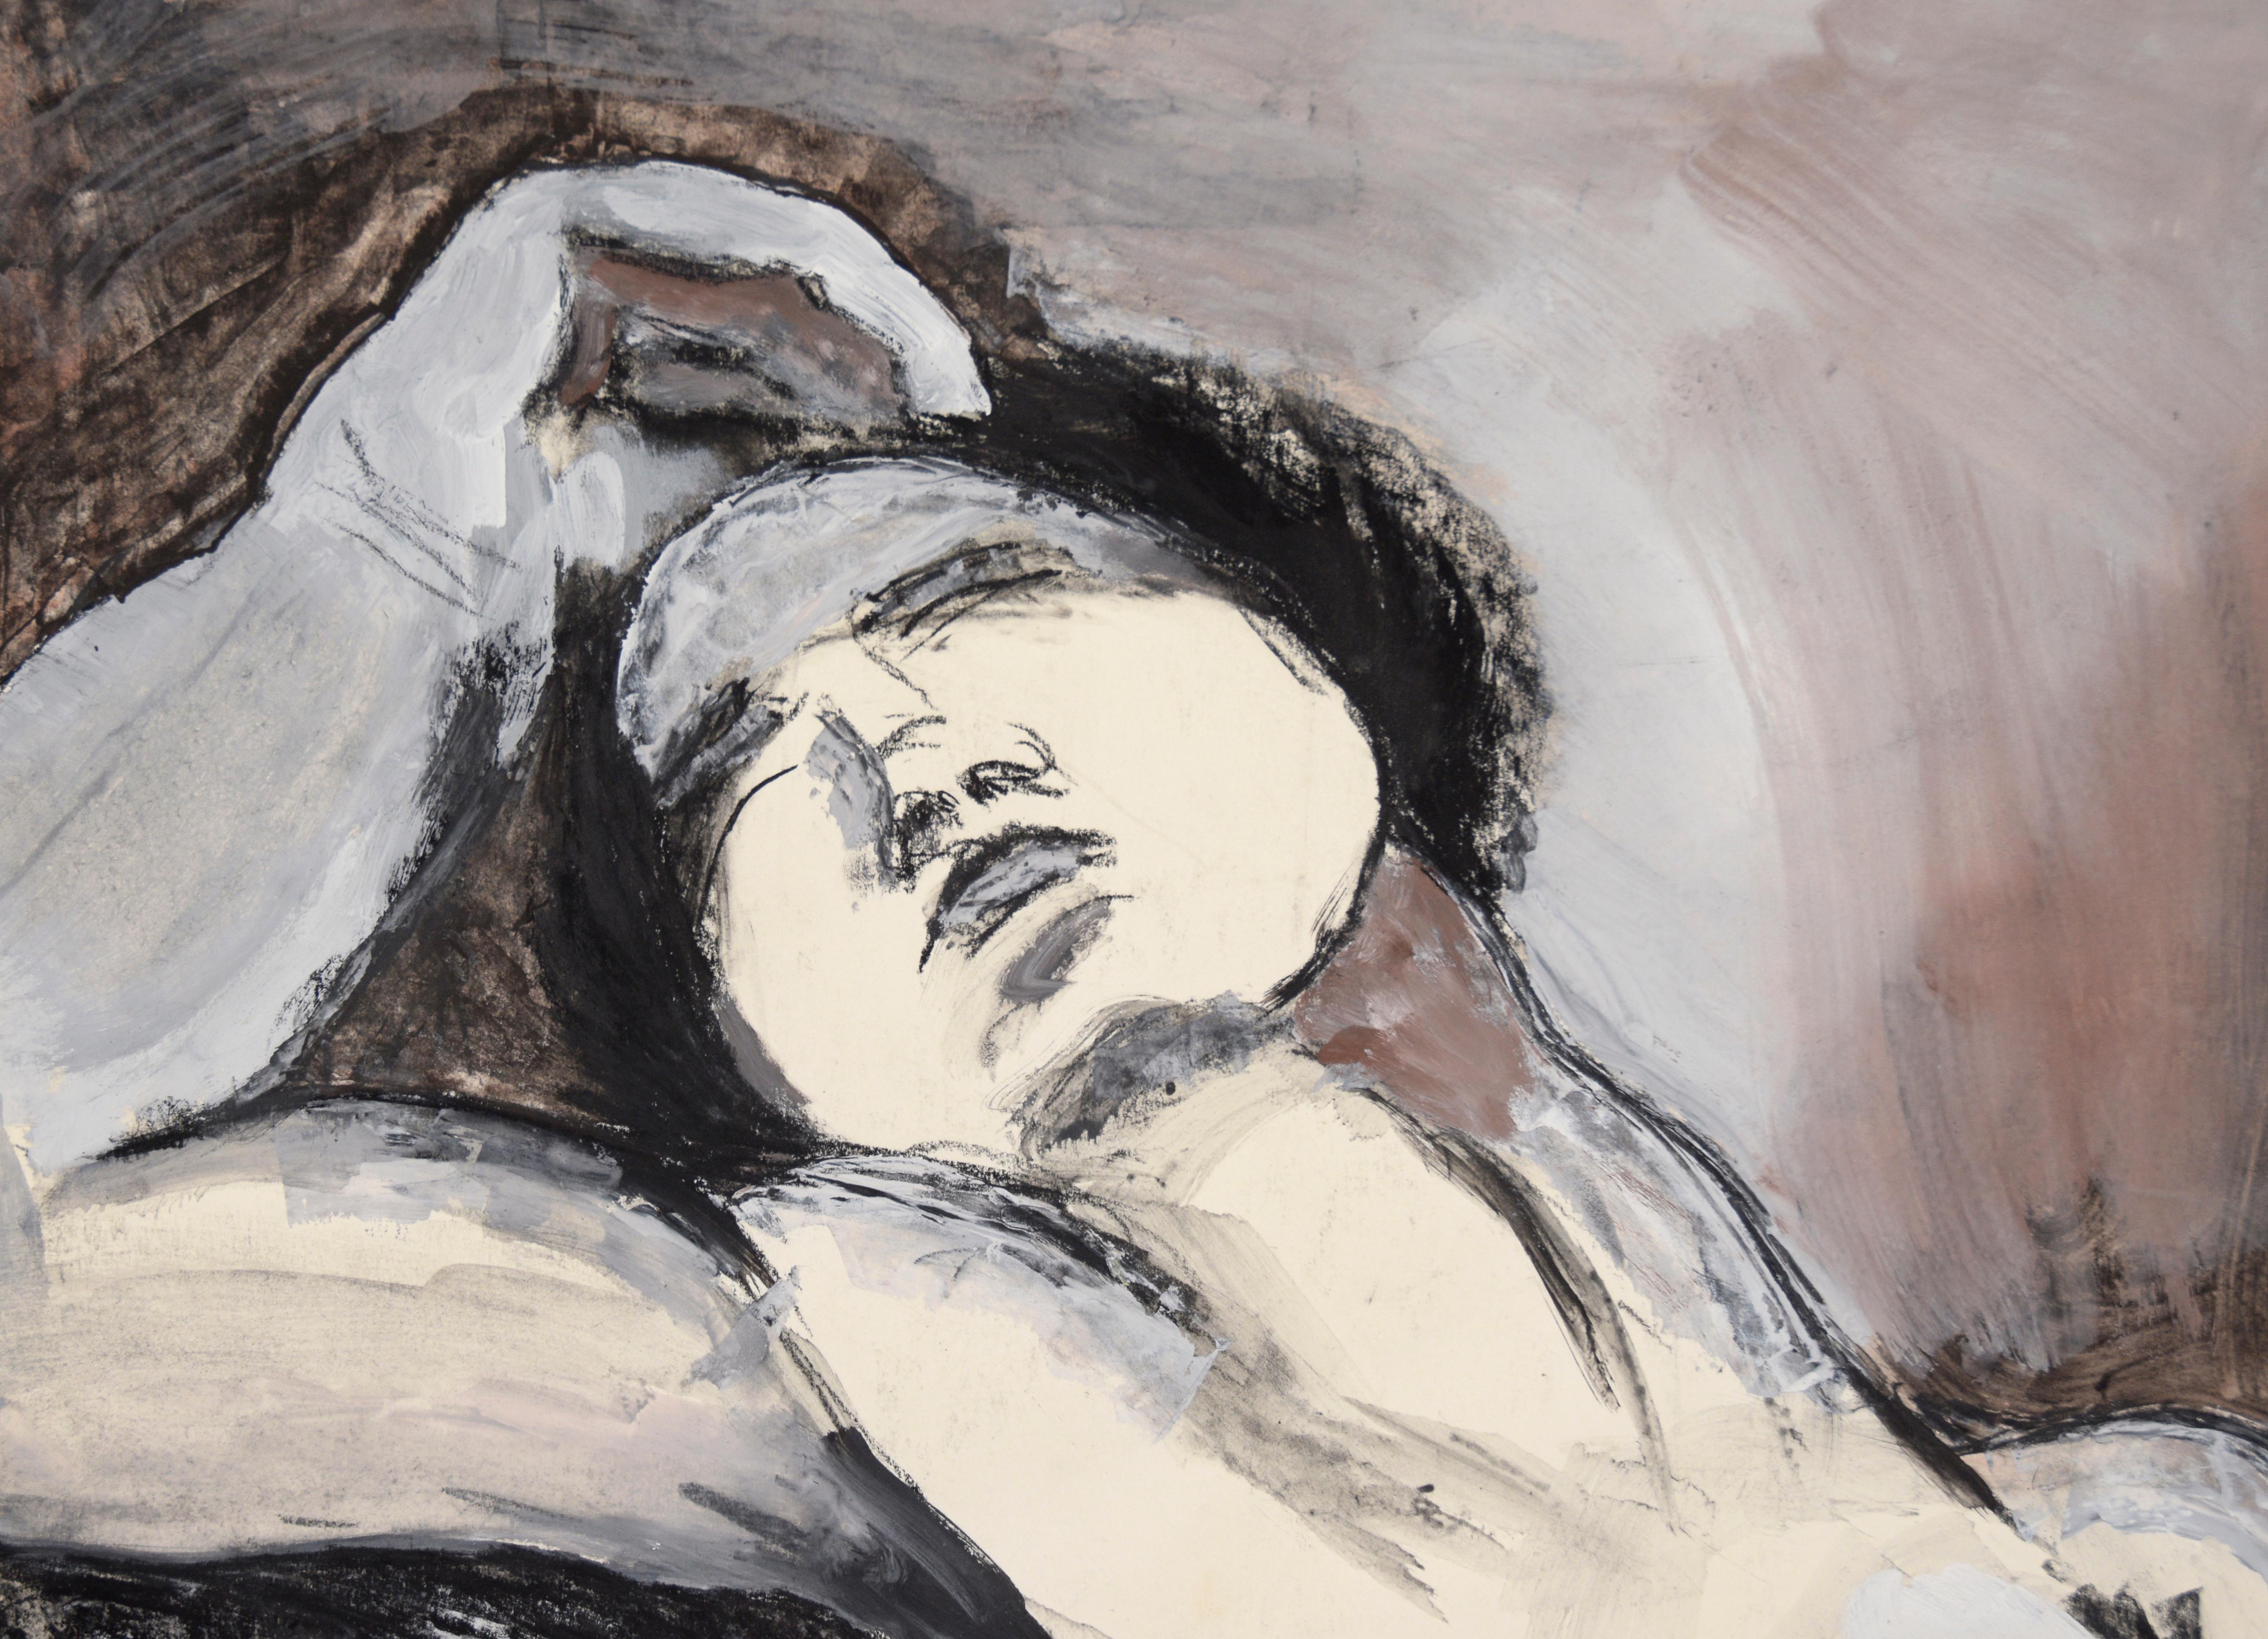 Black and White Nude Woman in Acrylic, Gouache, and Charcoal on Paper - Painting by Katherine Kallick